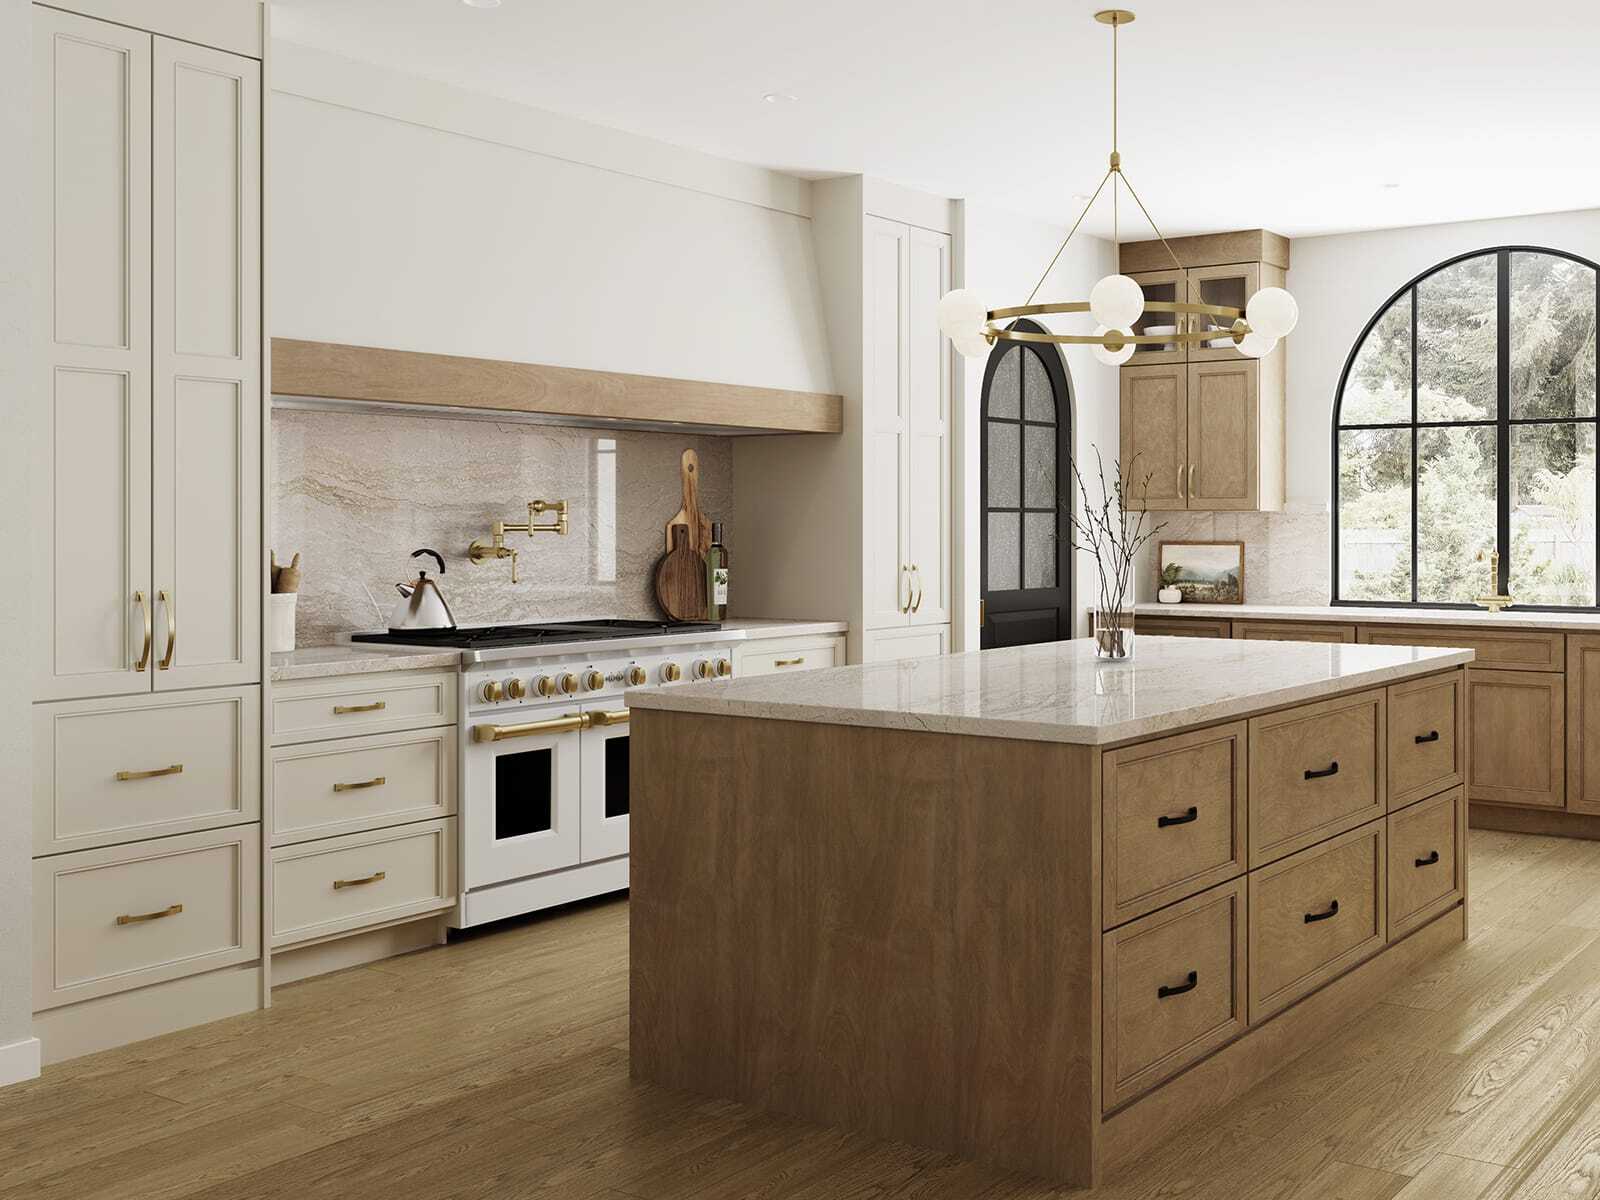 5 Kitchen Countertop and Cabinet Combinations